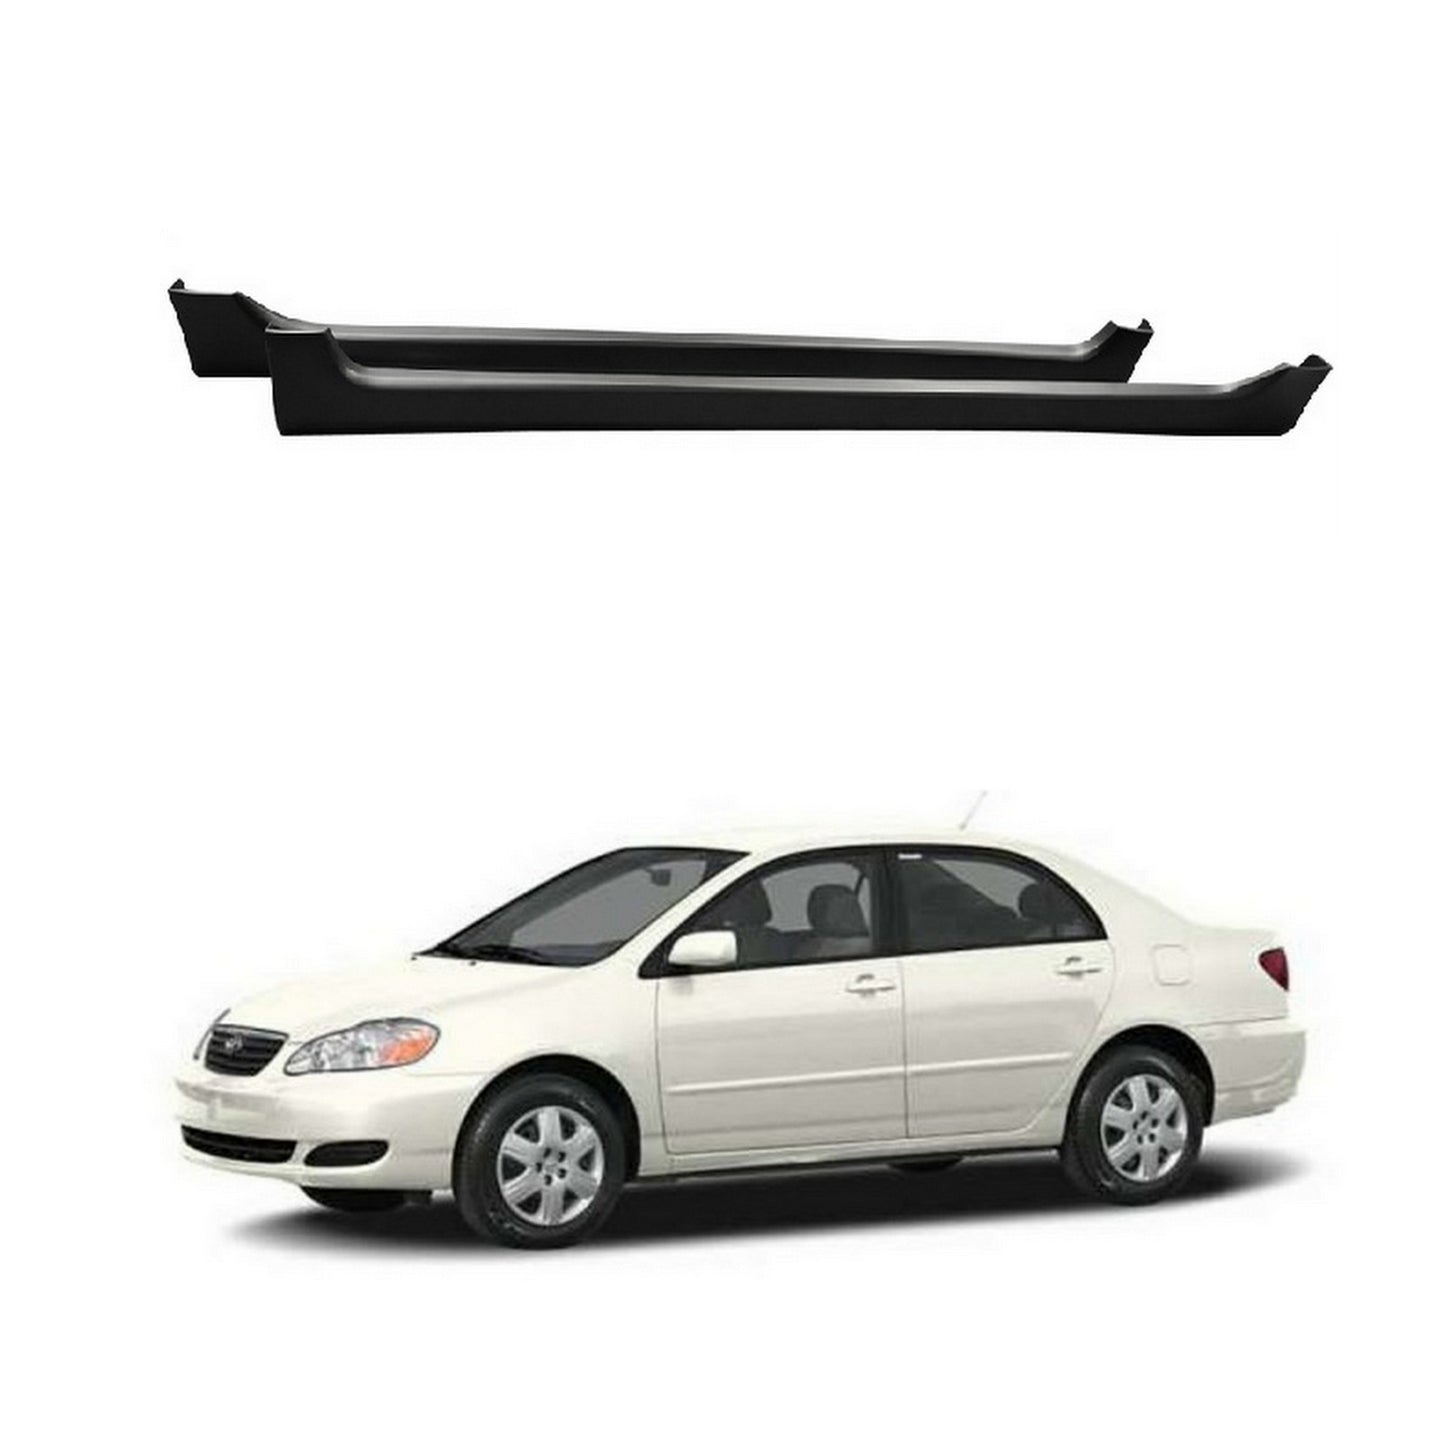 SIDE SKIRT, LOWER DOOR PANNEL BODY KIT ACCESSORIES FOR TOYOTA COROLLA